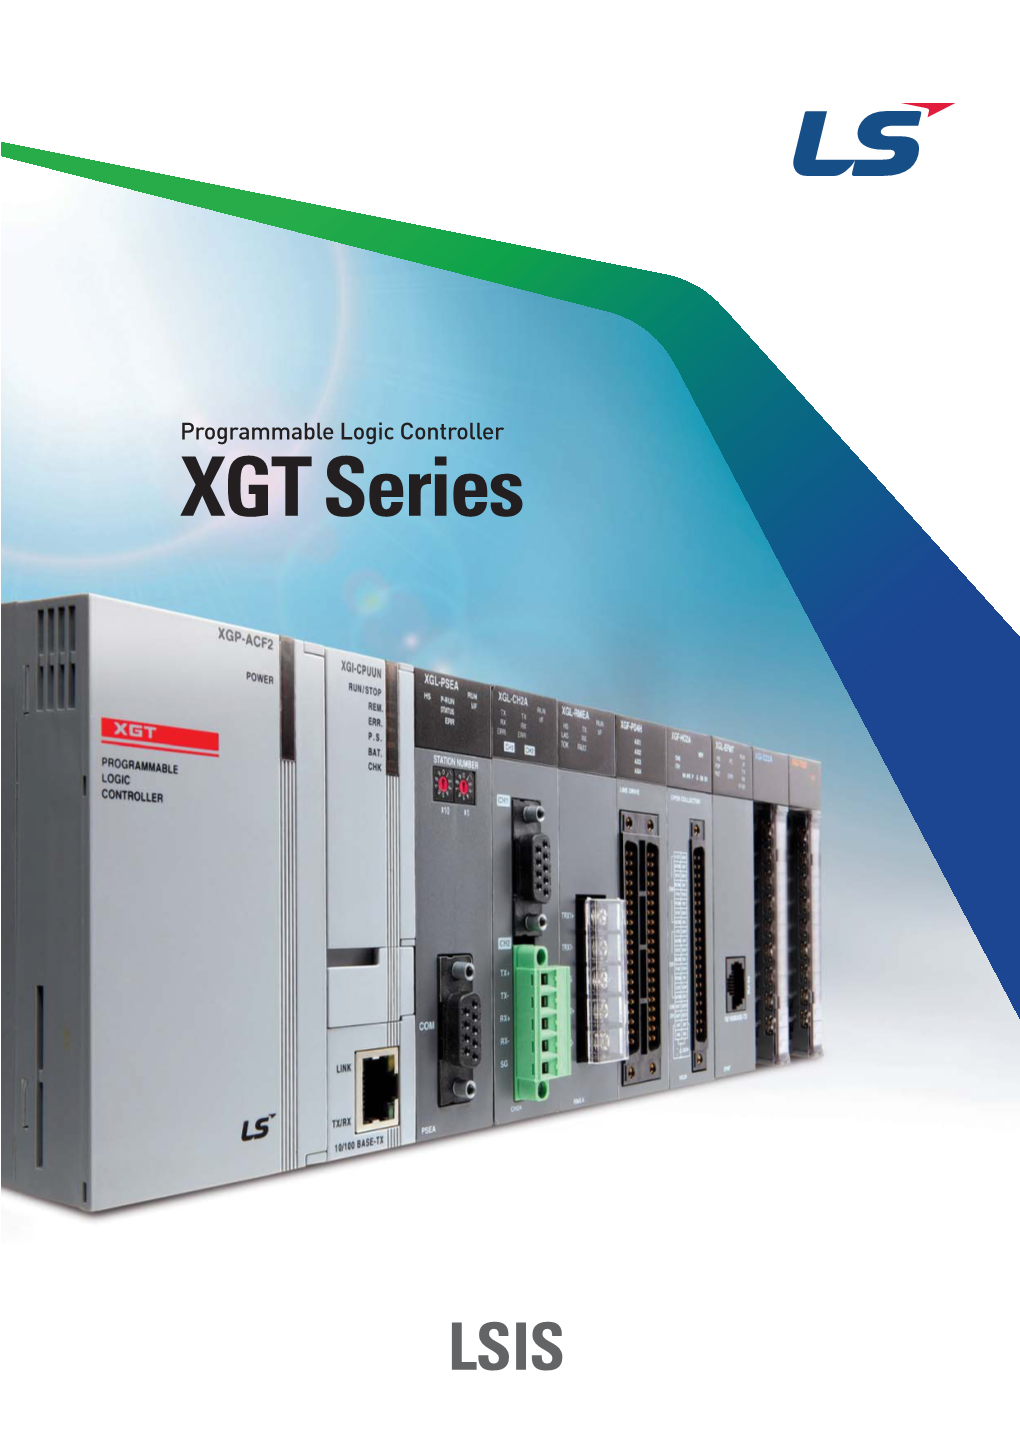 XGT Series XGT Series, Innovative Solutions for System Integration from Field to Information Level